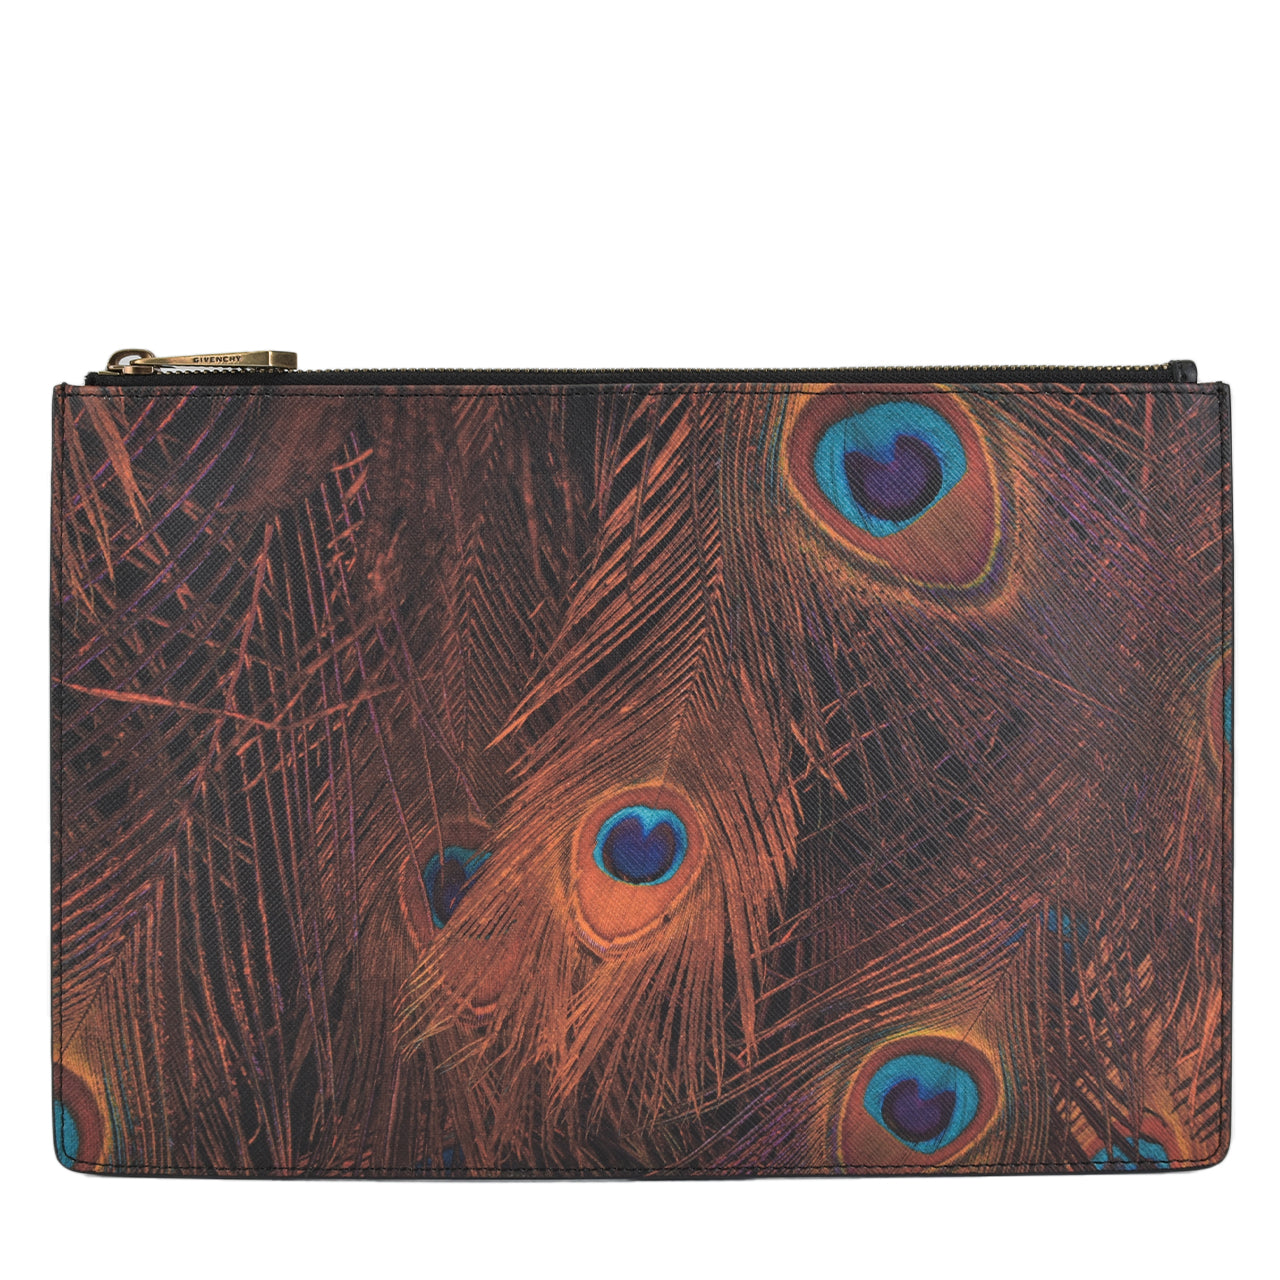 Peacock Feather Printed Canvas Large Flat Pouch Bag/Clutch (FW 2015) EX F 0165